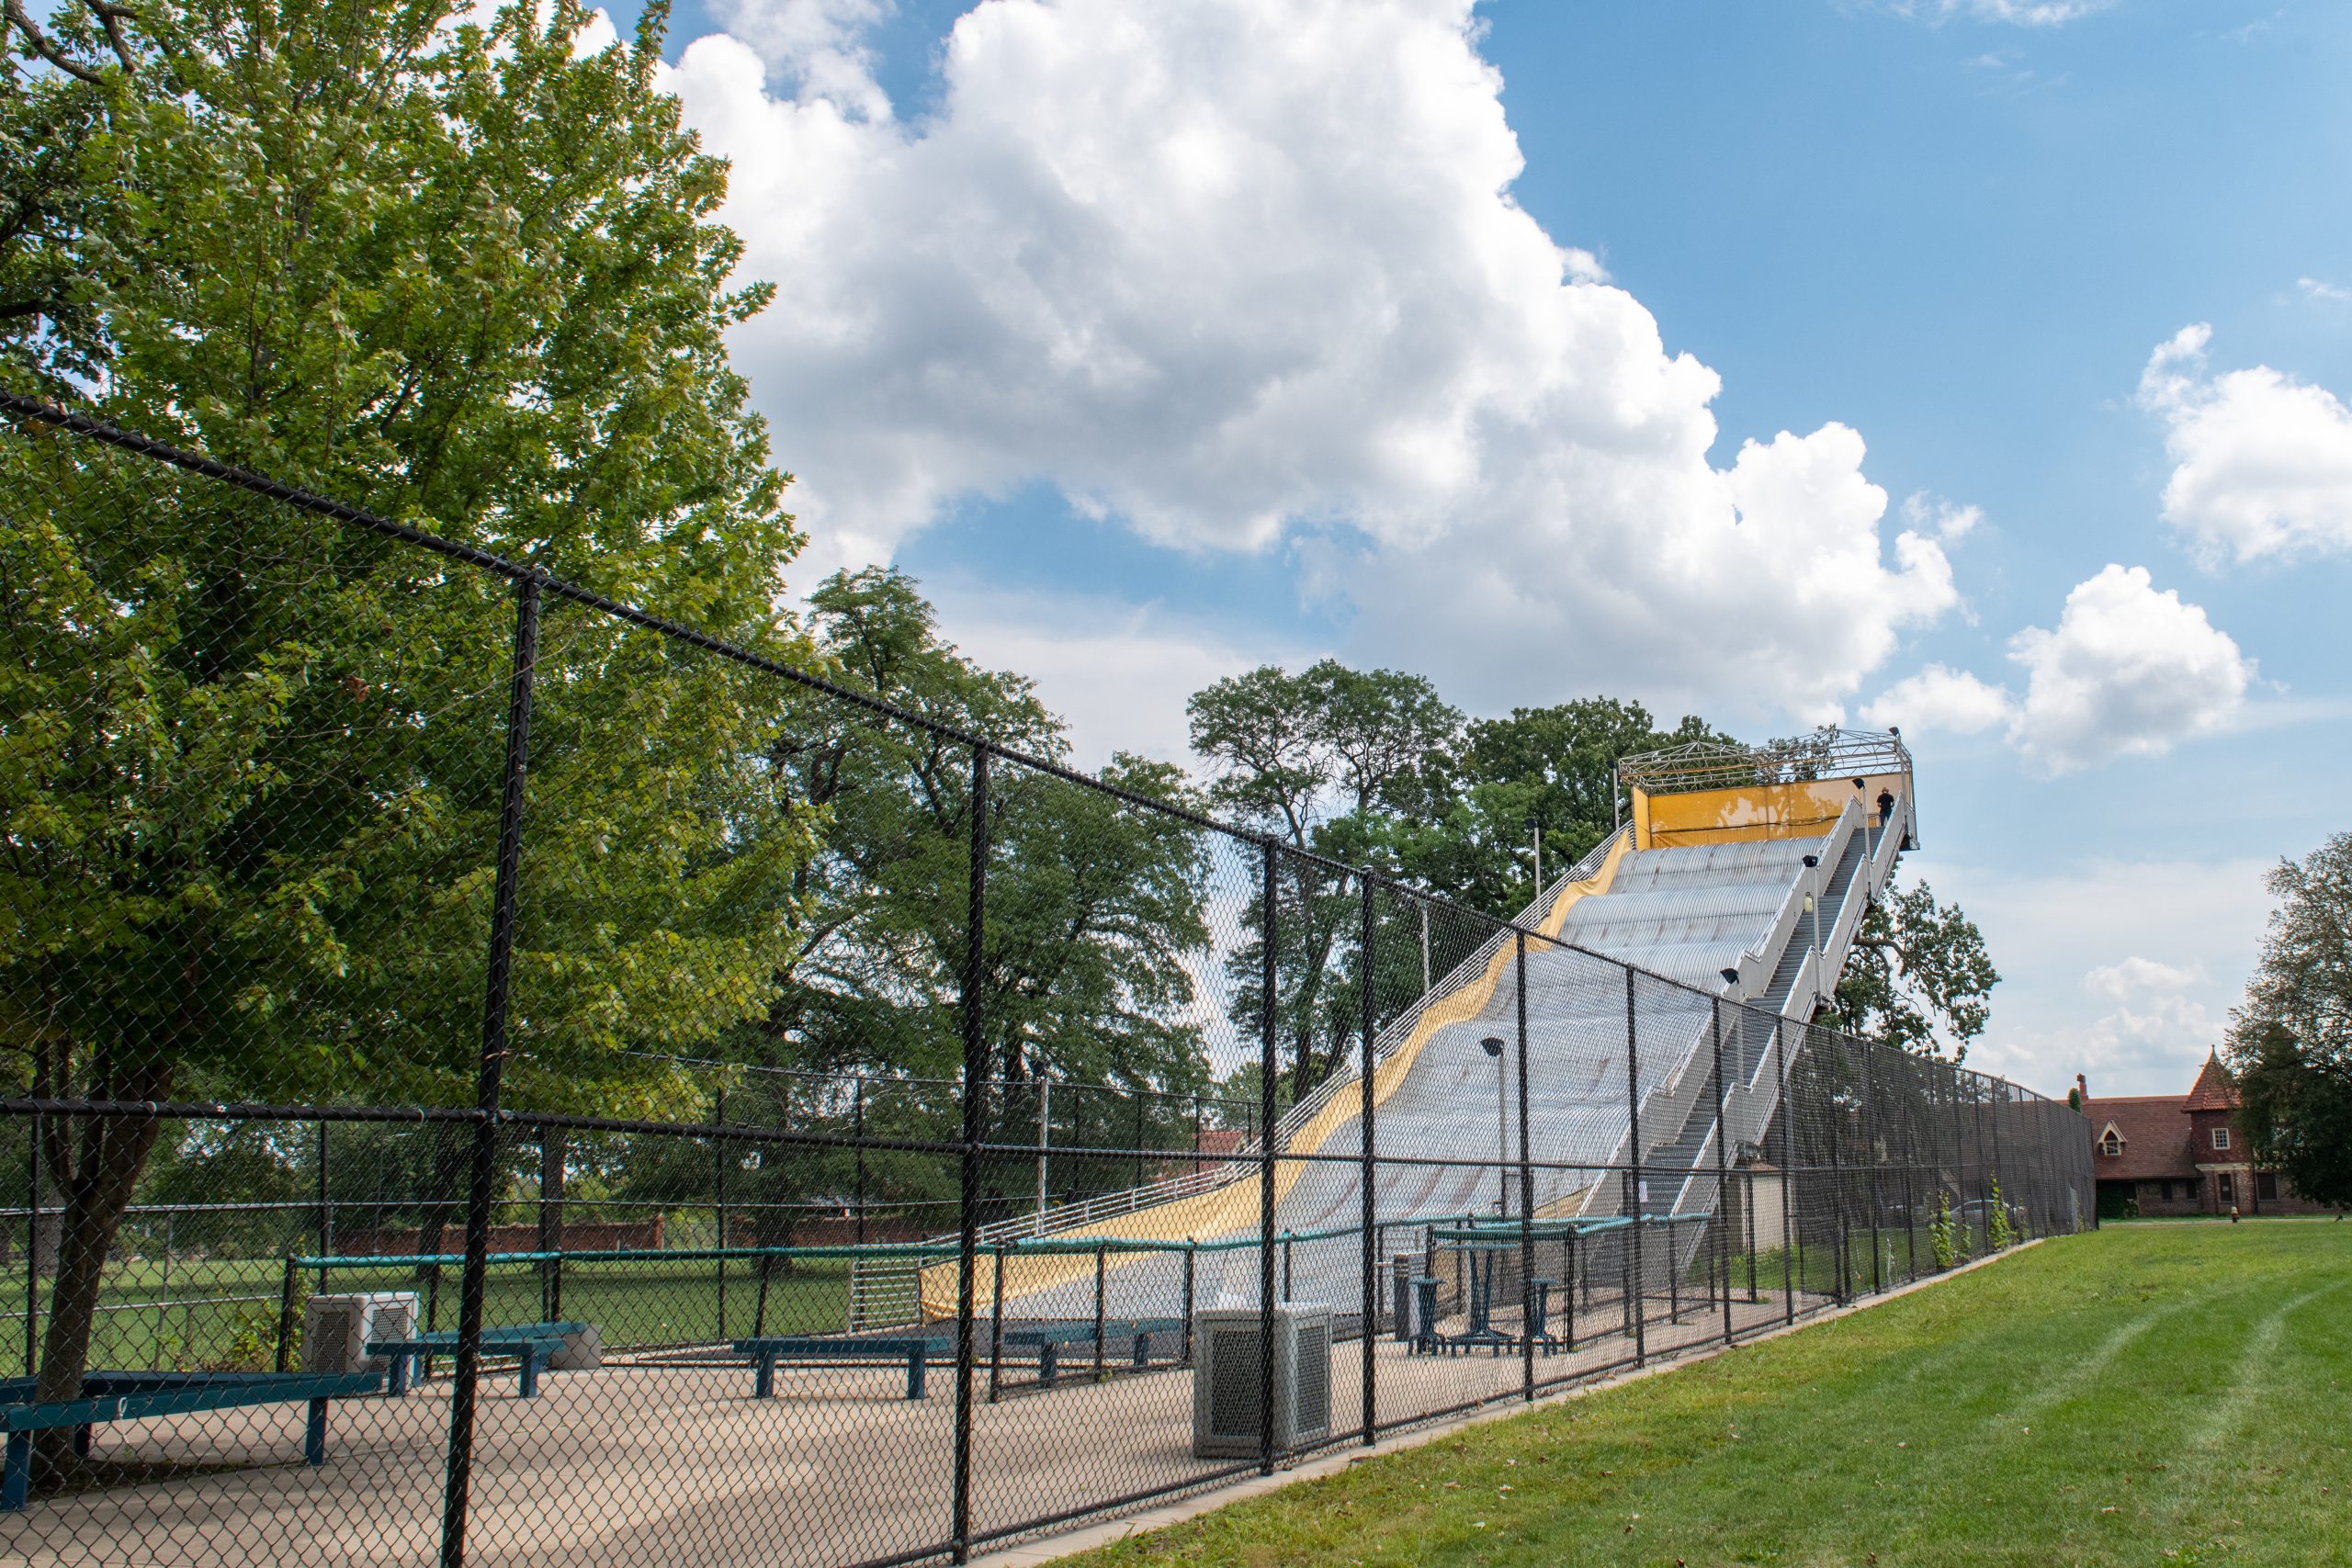 A tall, wide, wavy metal slide with a staircase leading to the top, behind a chain-link fence.